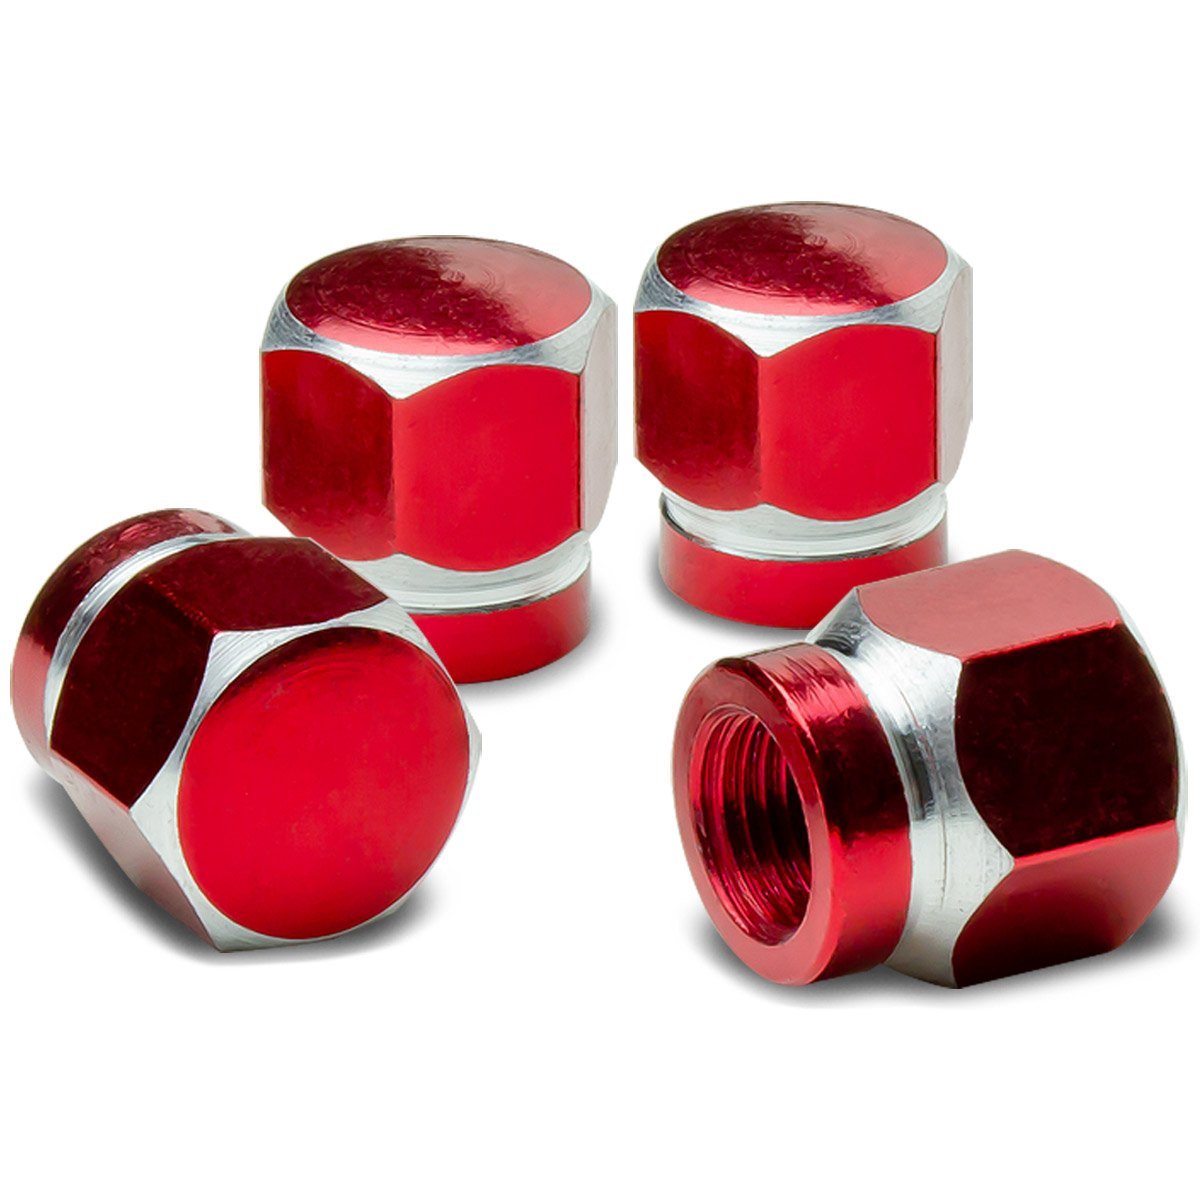 Hexagon Anodized & Powder-Coated Finish Red Tire Stem Valve Caps